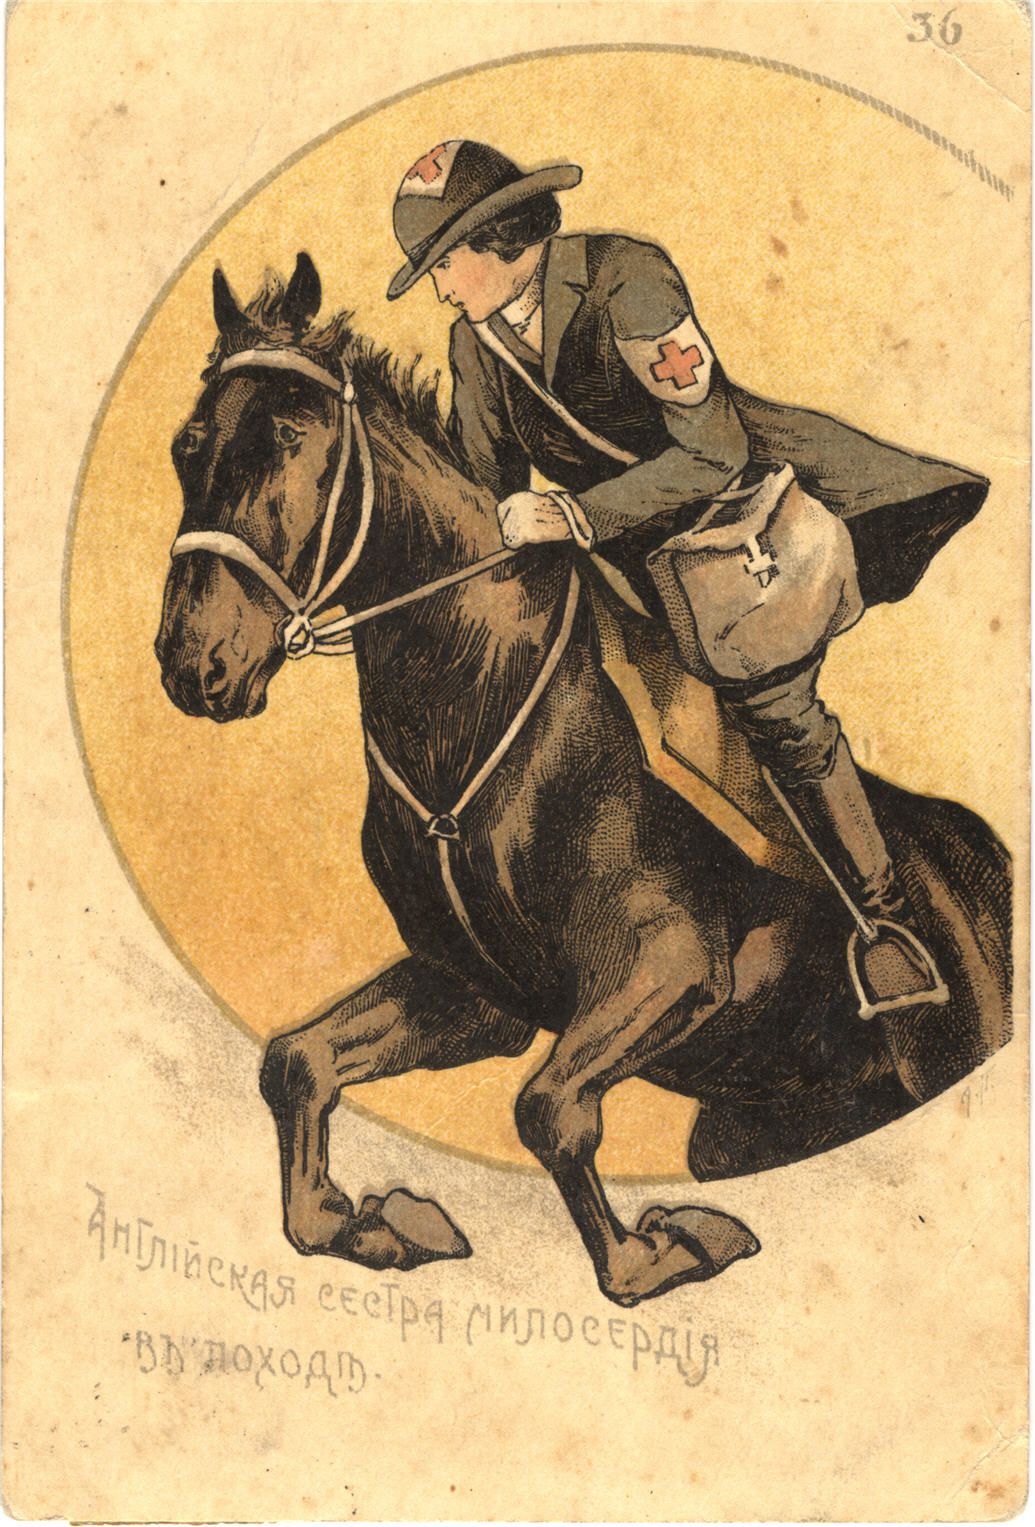 A White female with Red Cross armband riding a horse and carrying a satchel bag over her shoulder.